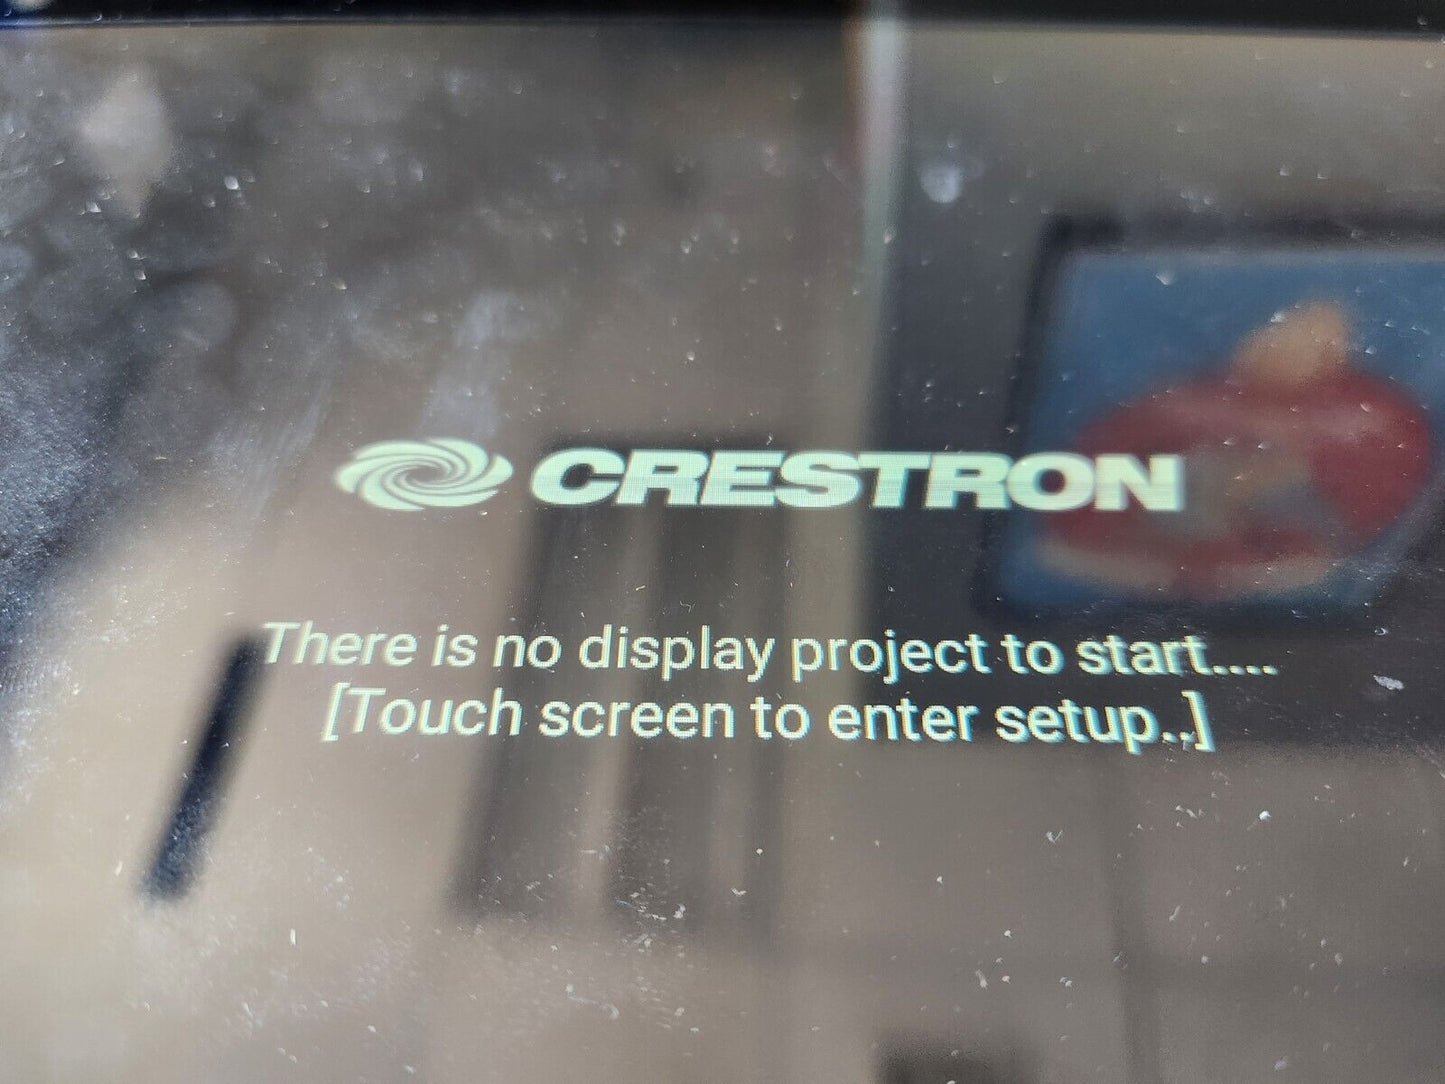 Crestron TSW-1060-NC-B-S 10.1 in. Touch Screen w/o Camera or Microphone 6510438